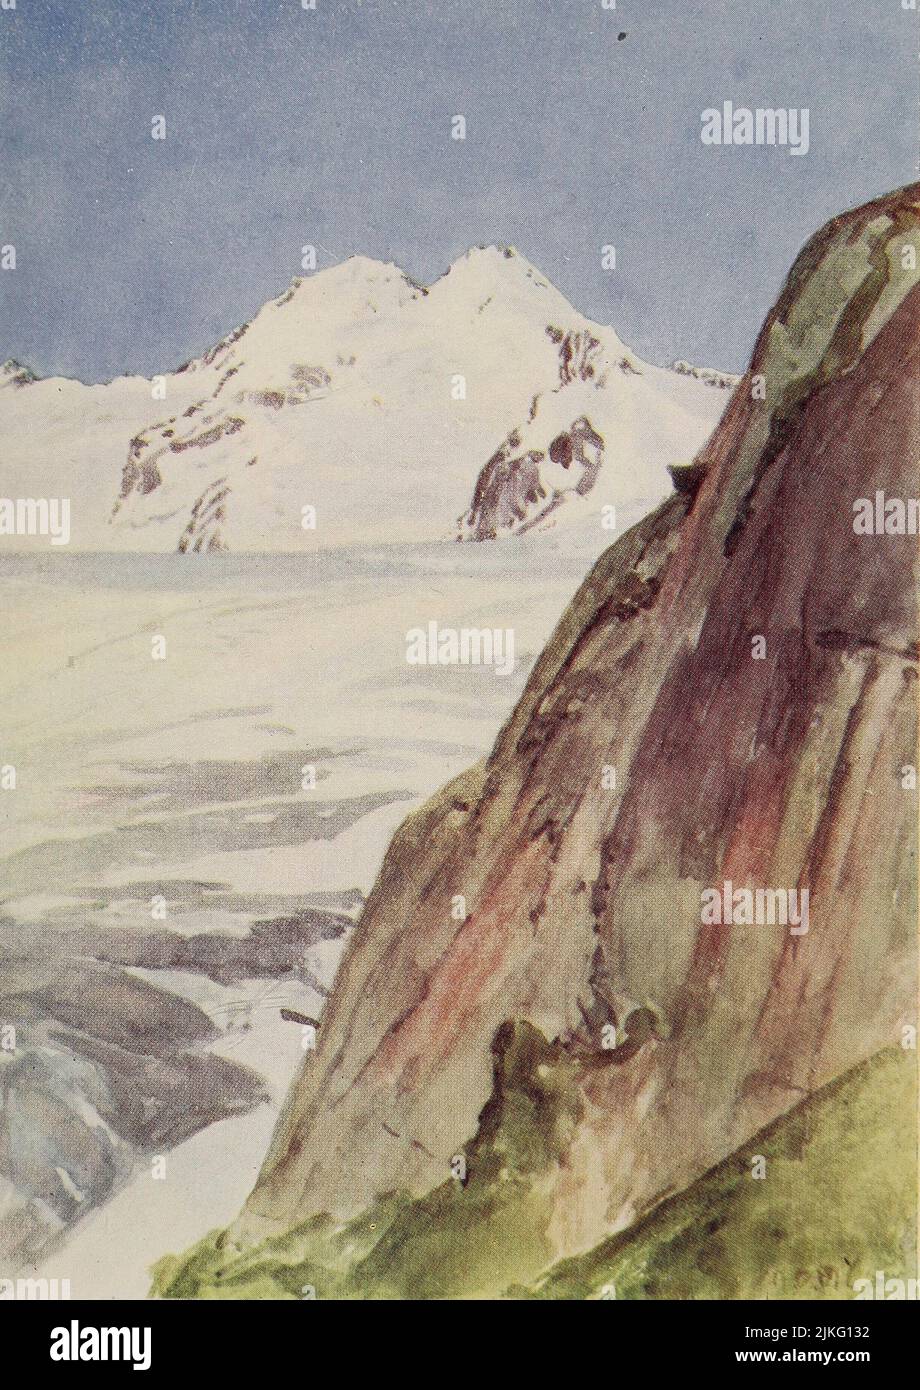 The Trugberg Looking up the Aletsch glacier from corner of Marjelen See Painted by A. D. McCormick from the book ' The Alps ' by Sir William Martin Conway,  Publication date 1904 Publisher London : Adam and Charles Black Arthur David McCormick FRGS (Coleraine 14 October 1860 – 1943) was a notable British illustrator and painter of landscapes, historical scenes, naval subjects, and genre scenes. Stock Photo